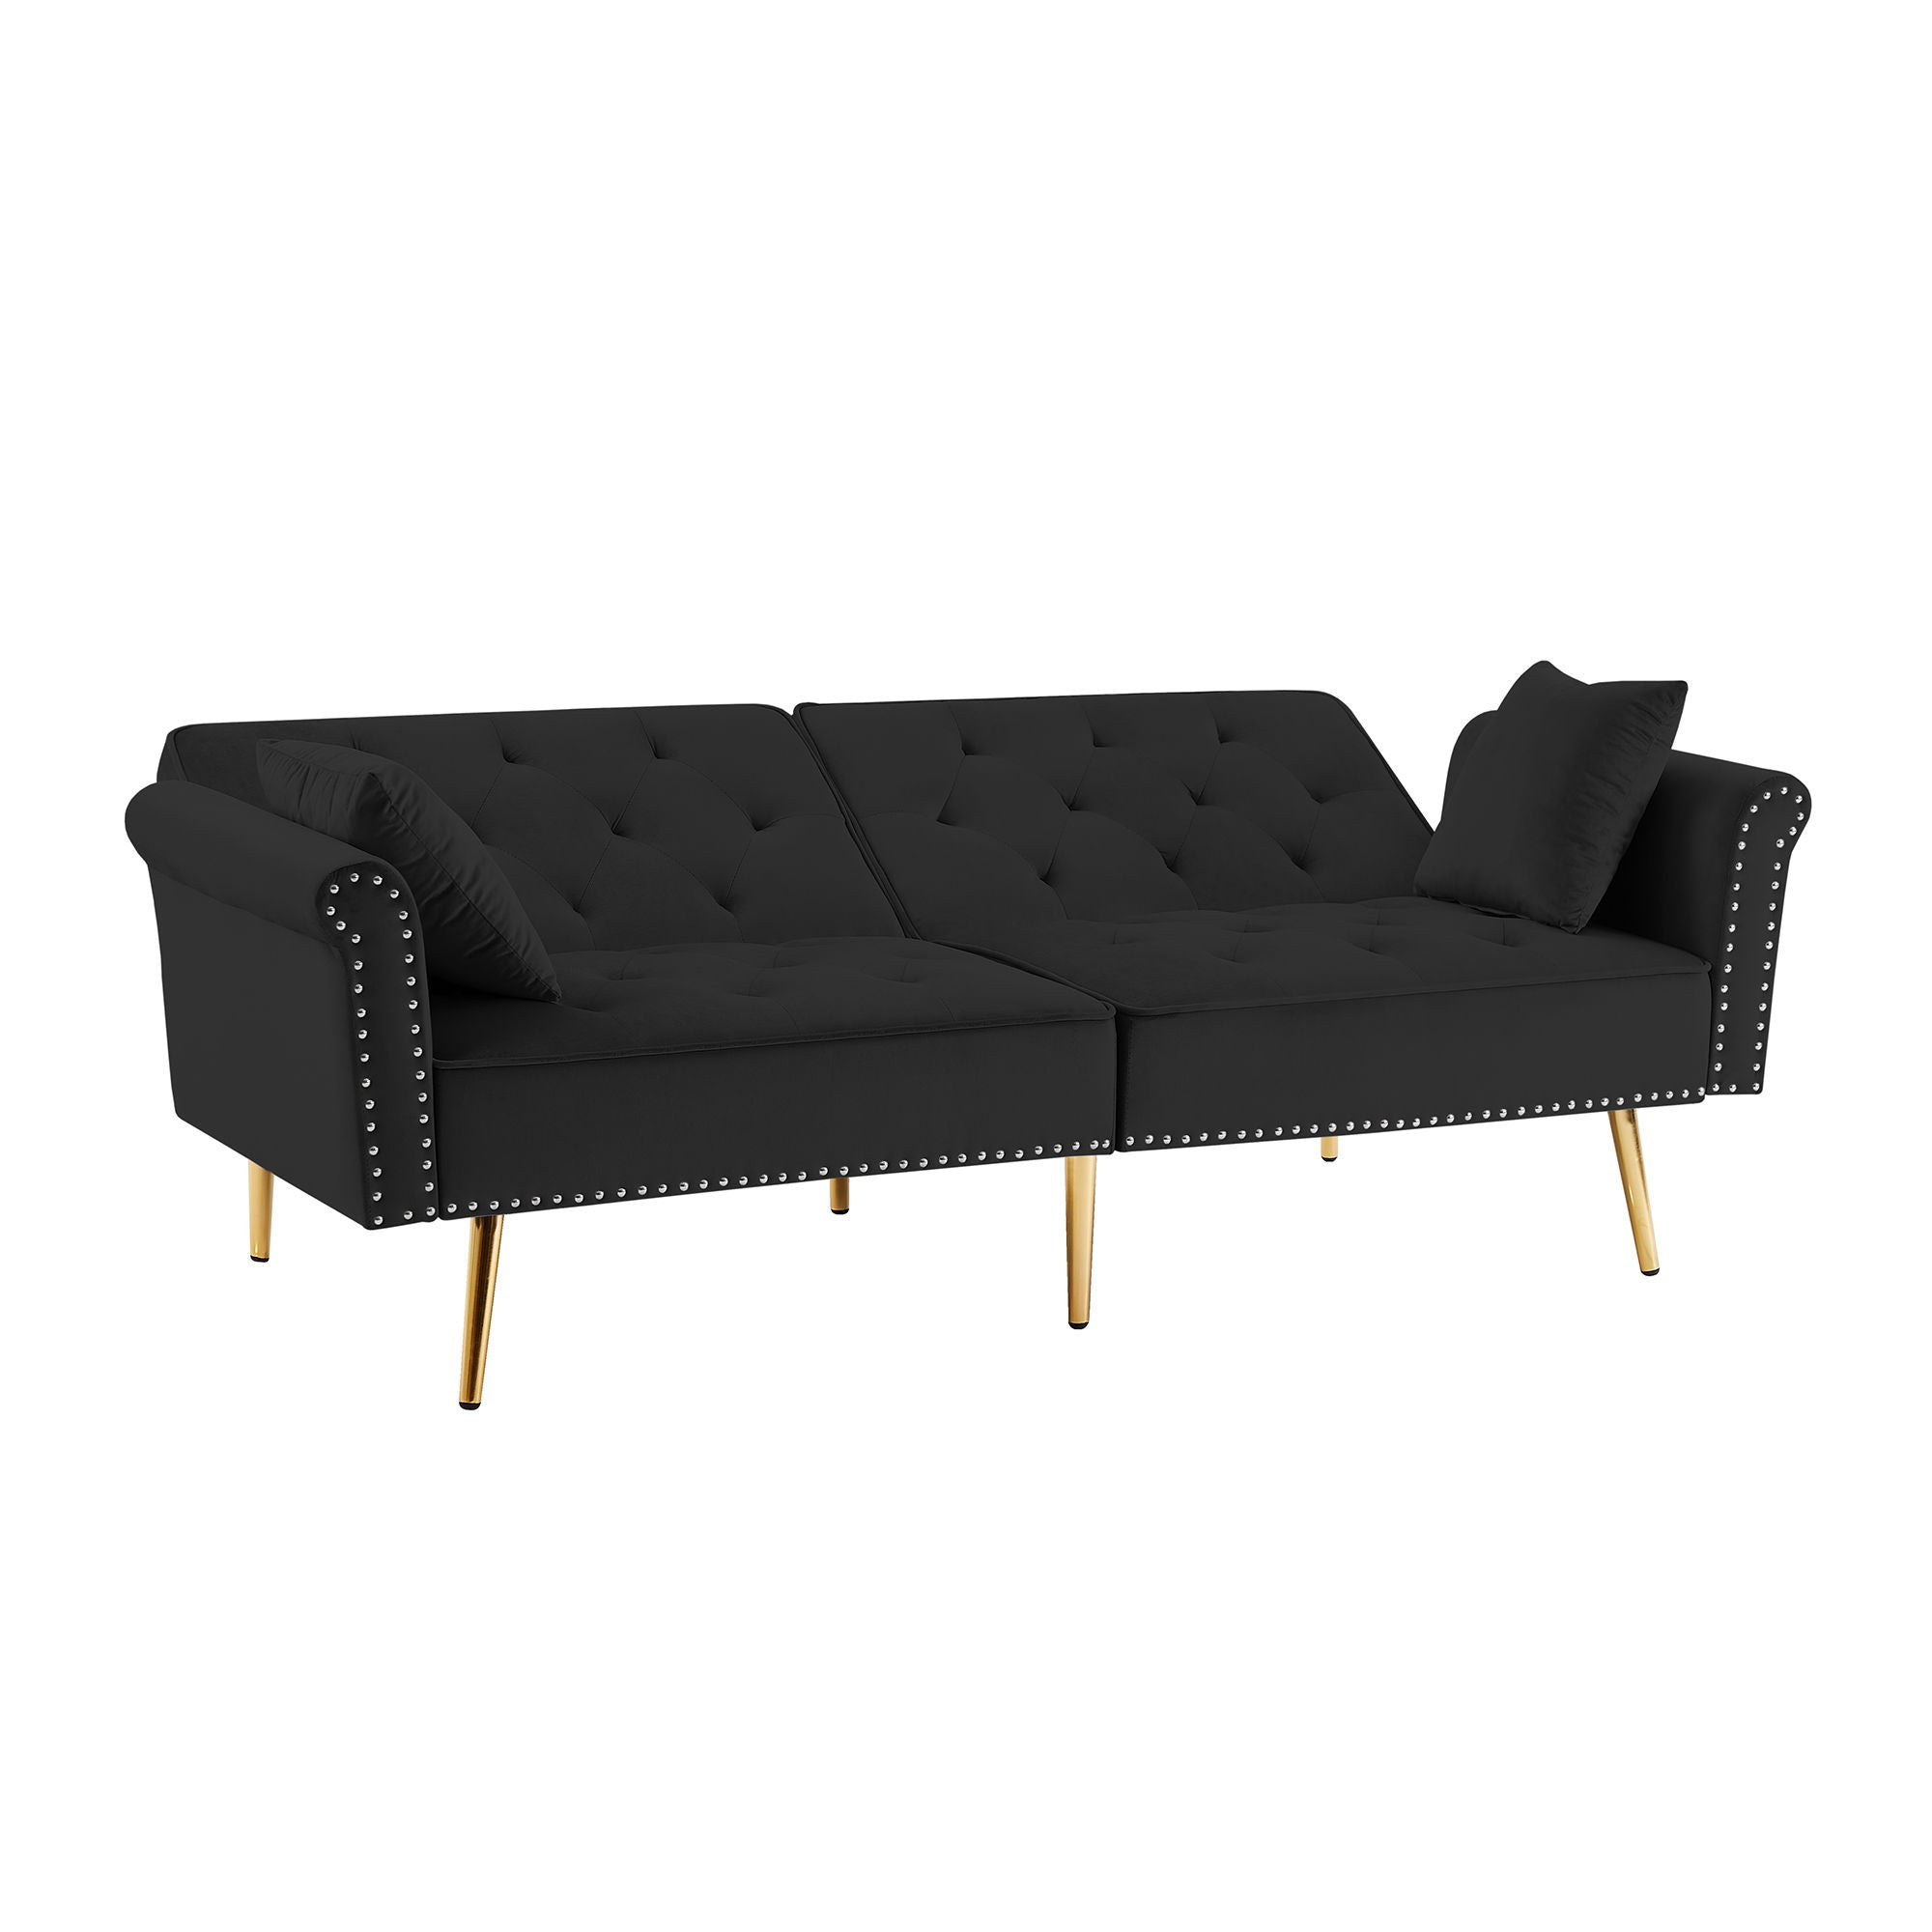 Modern Velvet Tufted Sofa Couch With 2 Pillows And Nailhead Trim, Loveseat Sofa Futon Sofa Bed With Metal Legs For Living Room - Black